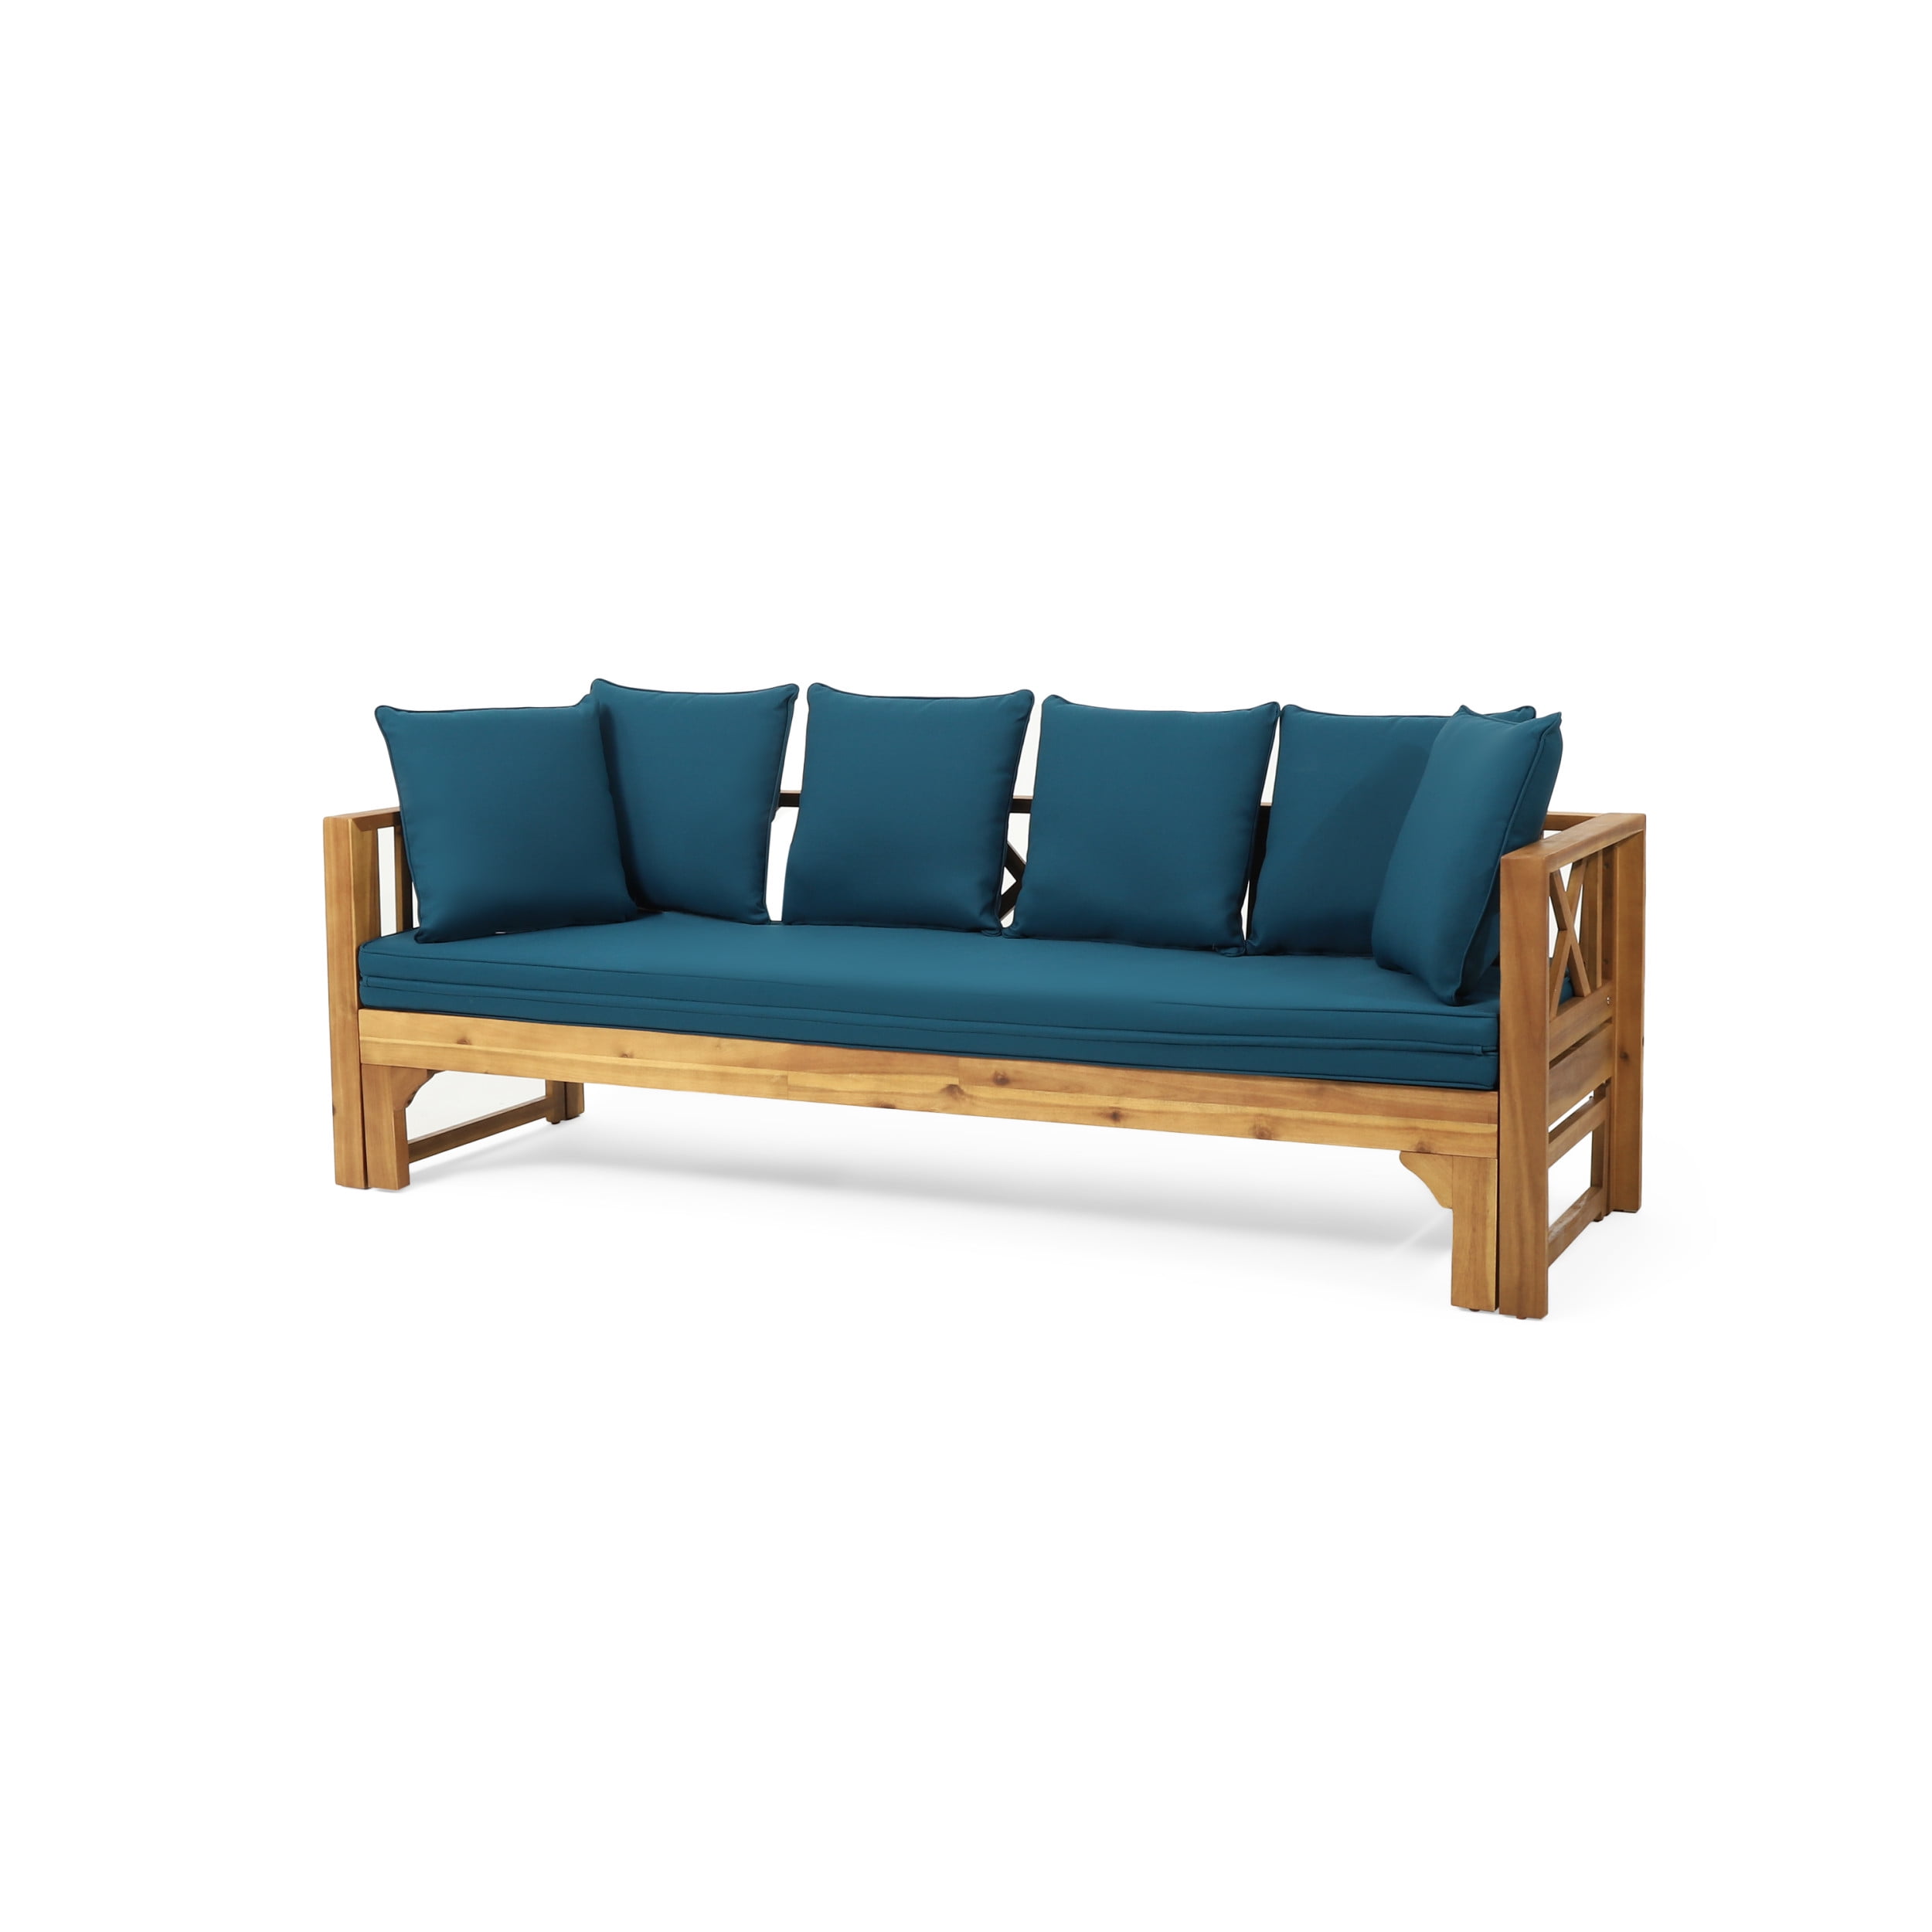 Camille Beach Outdoor Extendable Acacia Wood Daybed Sofa, Teak, and Dark Teal